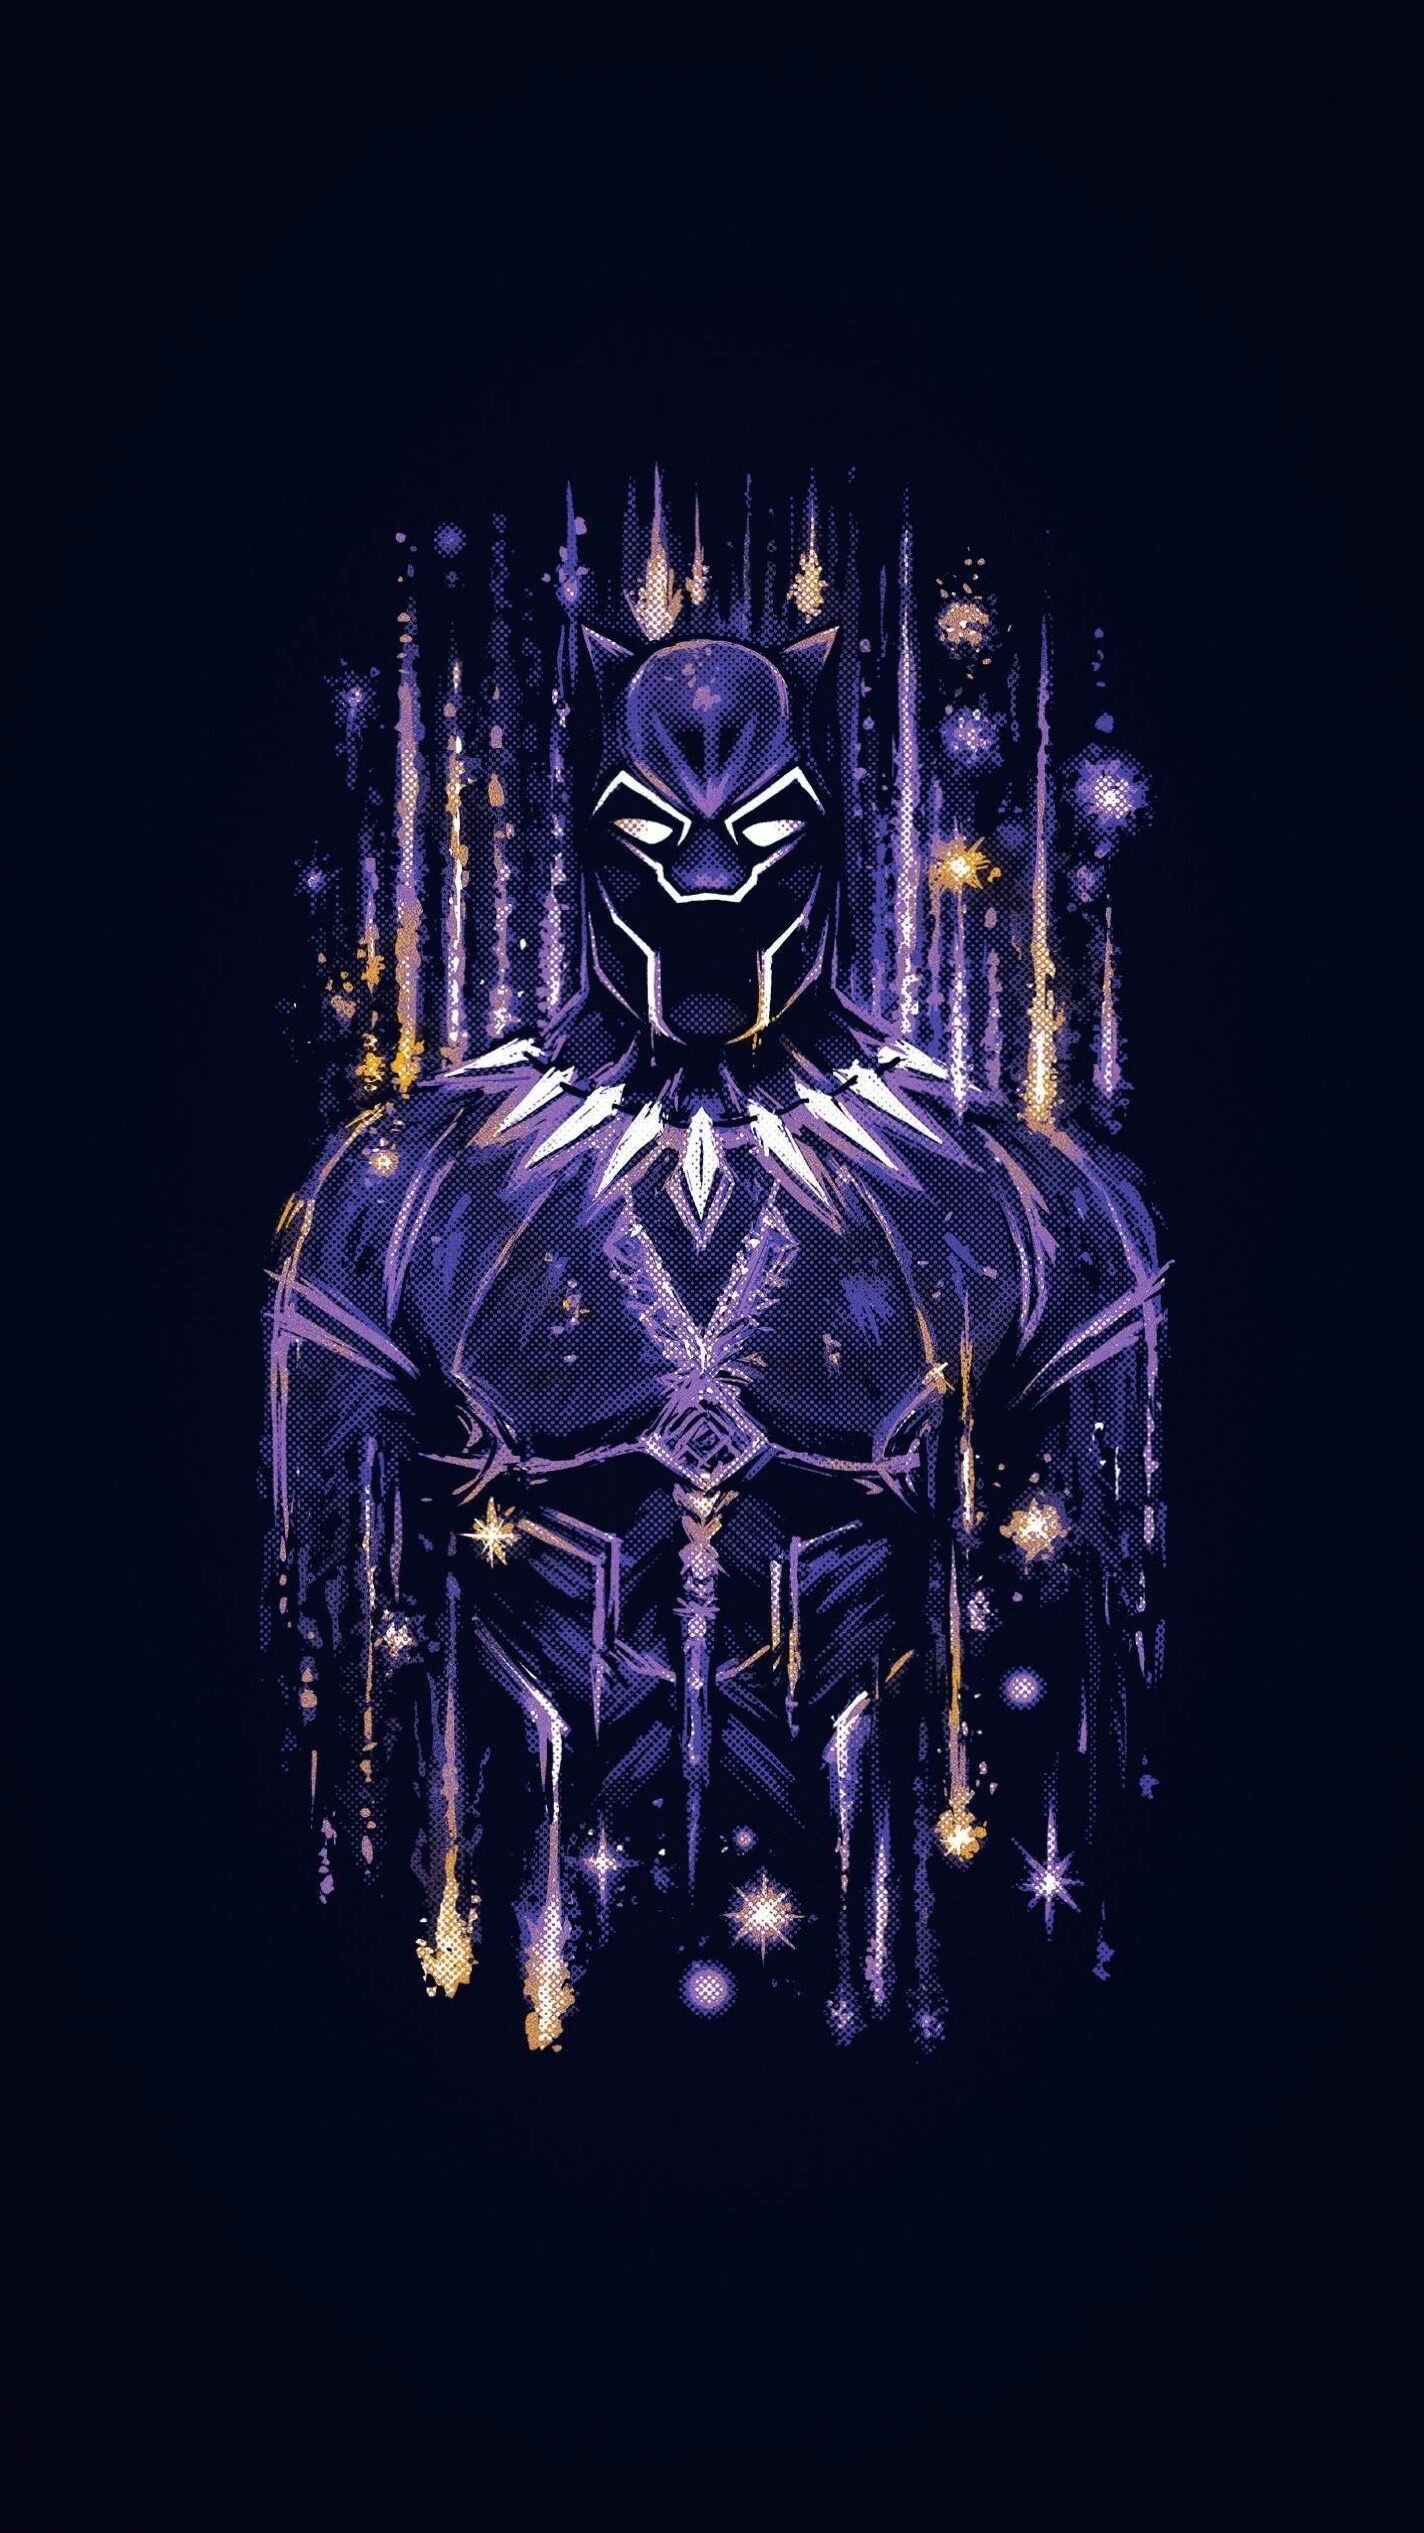 Black Panther: Wakanda Forever: The most-watched Marvel film to premiere on Disney+ worldwide. 1430x2540 HD Wallpaper.